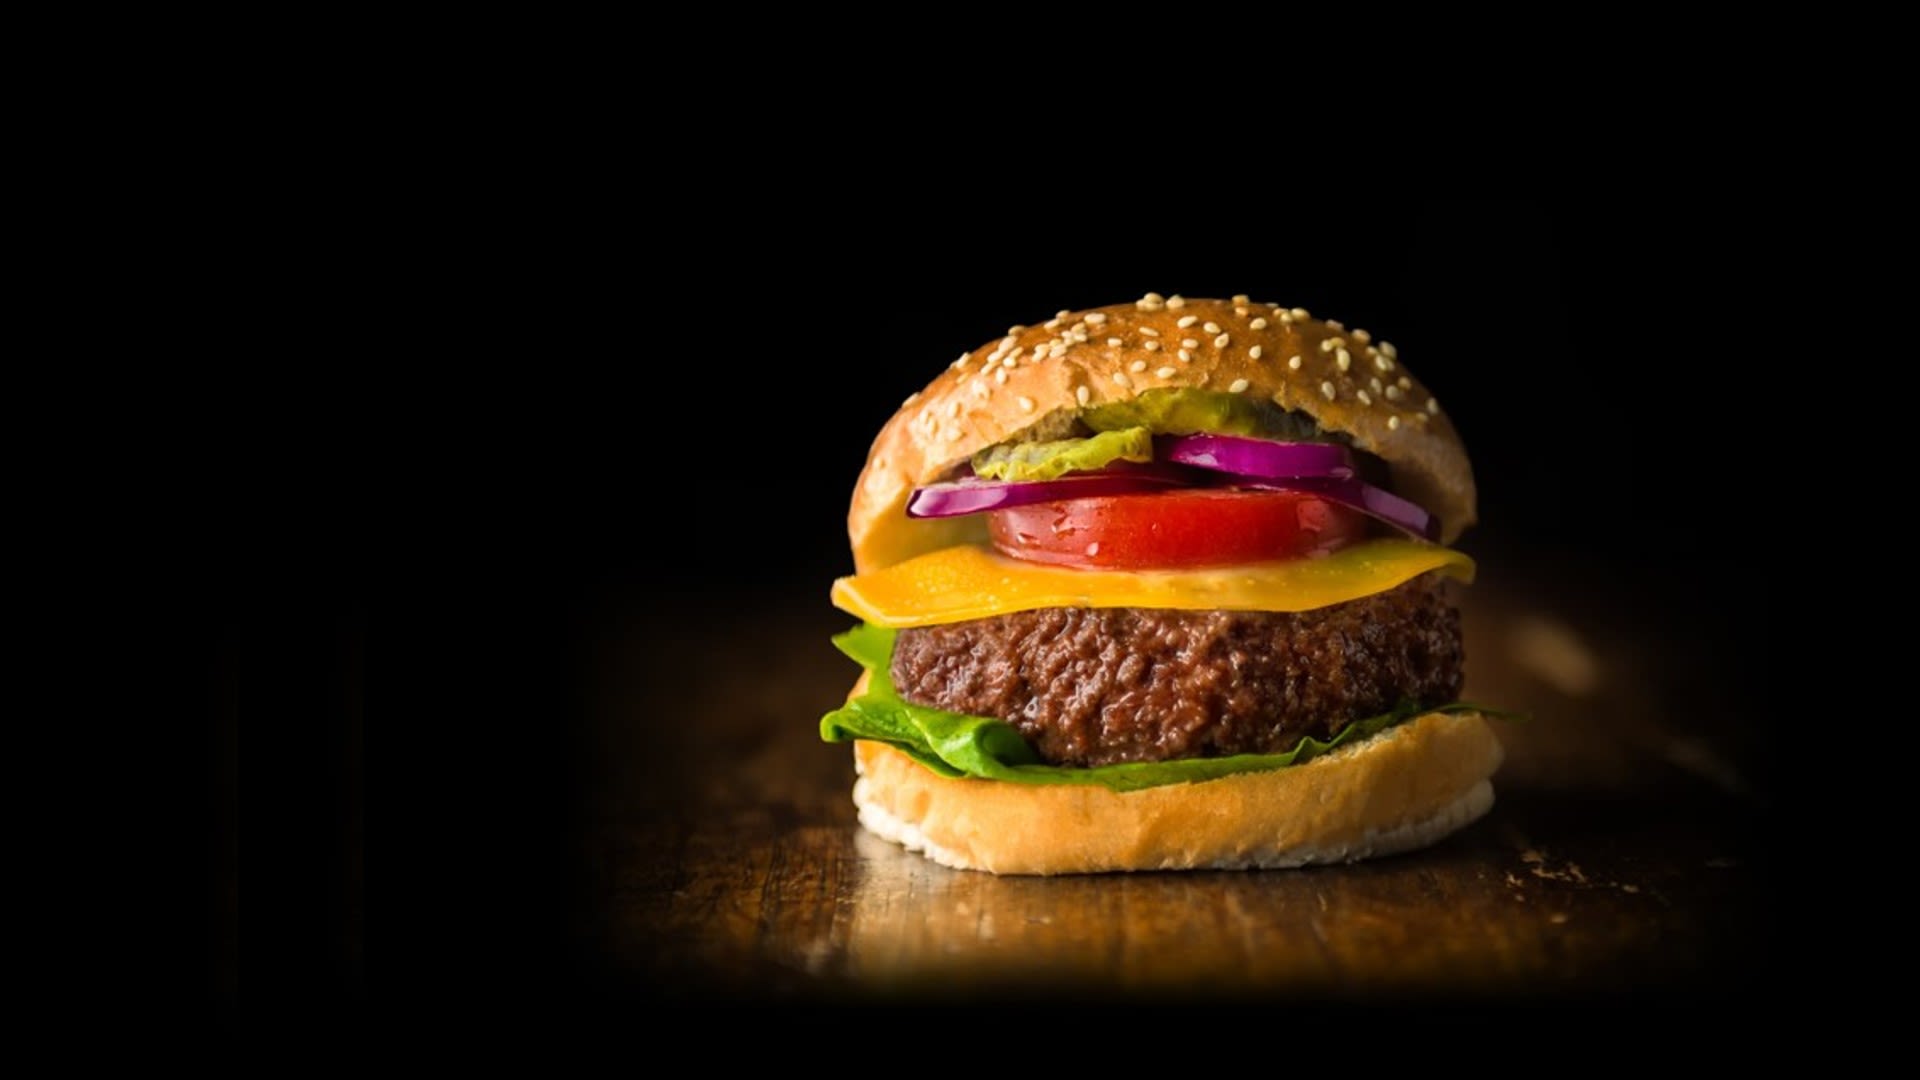 Photograph of what looks like a normal hamburger, created by alt-meat company Mosa